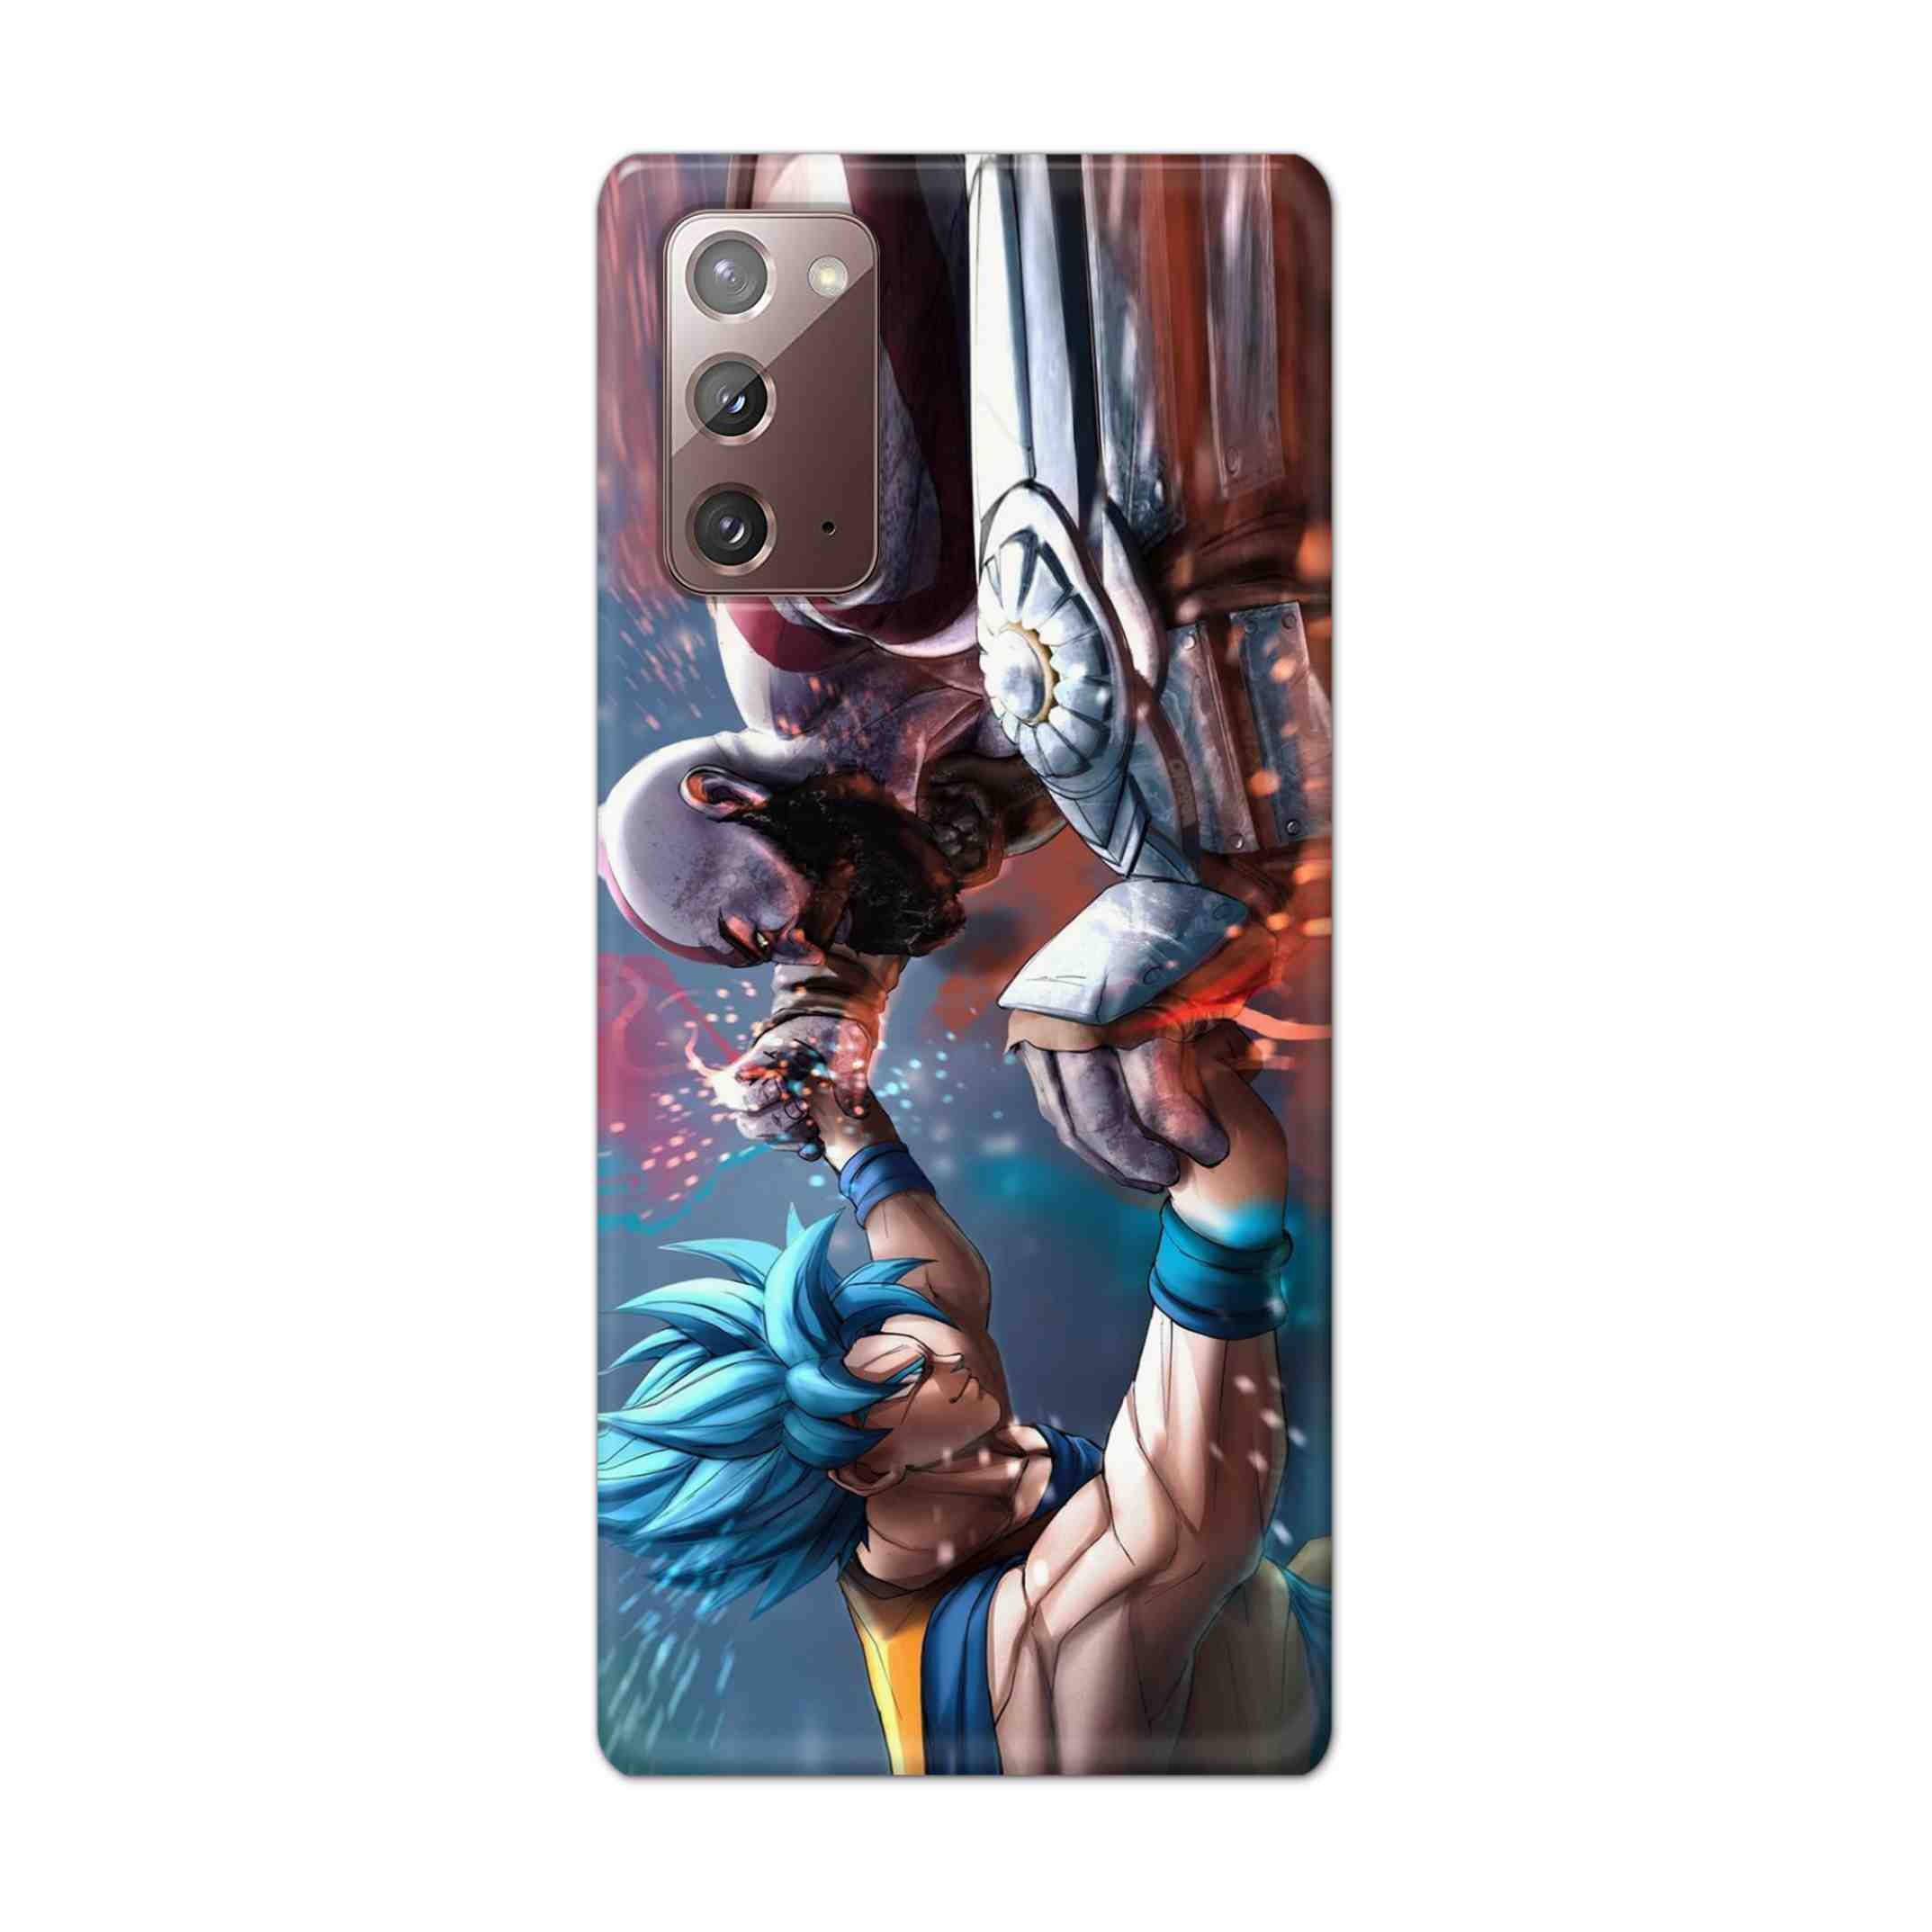 Buy Goku Vs Kratos Hard Back Mobile Phone Case Cover For Samsung Galaxy Note 20 Online